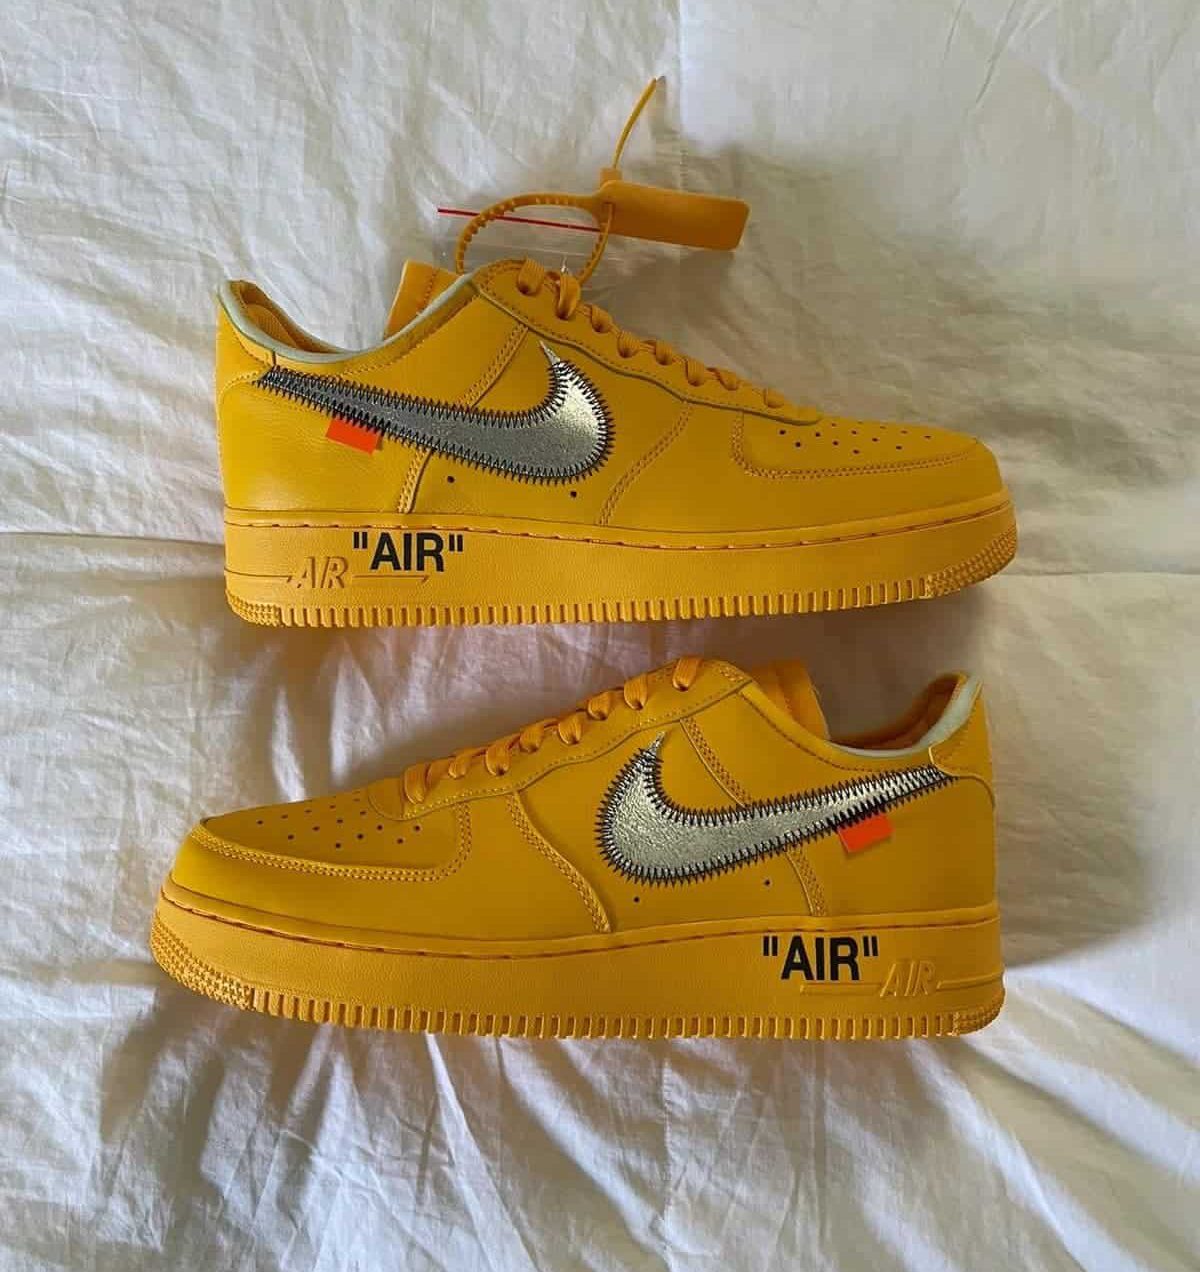 Nike X Off-White Air Force 1 University Gold Fake Vs Real Guide 